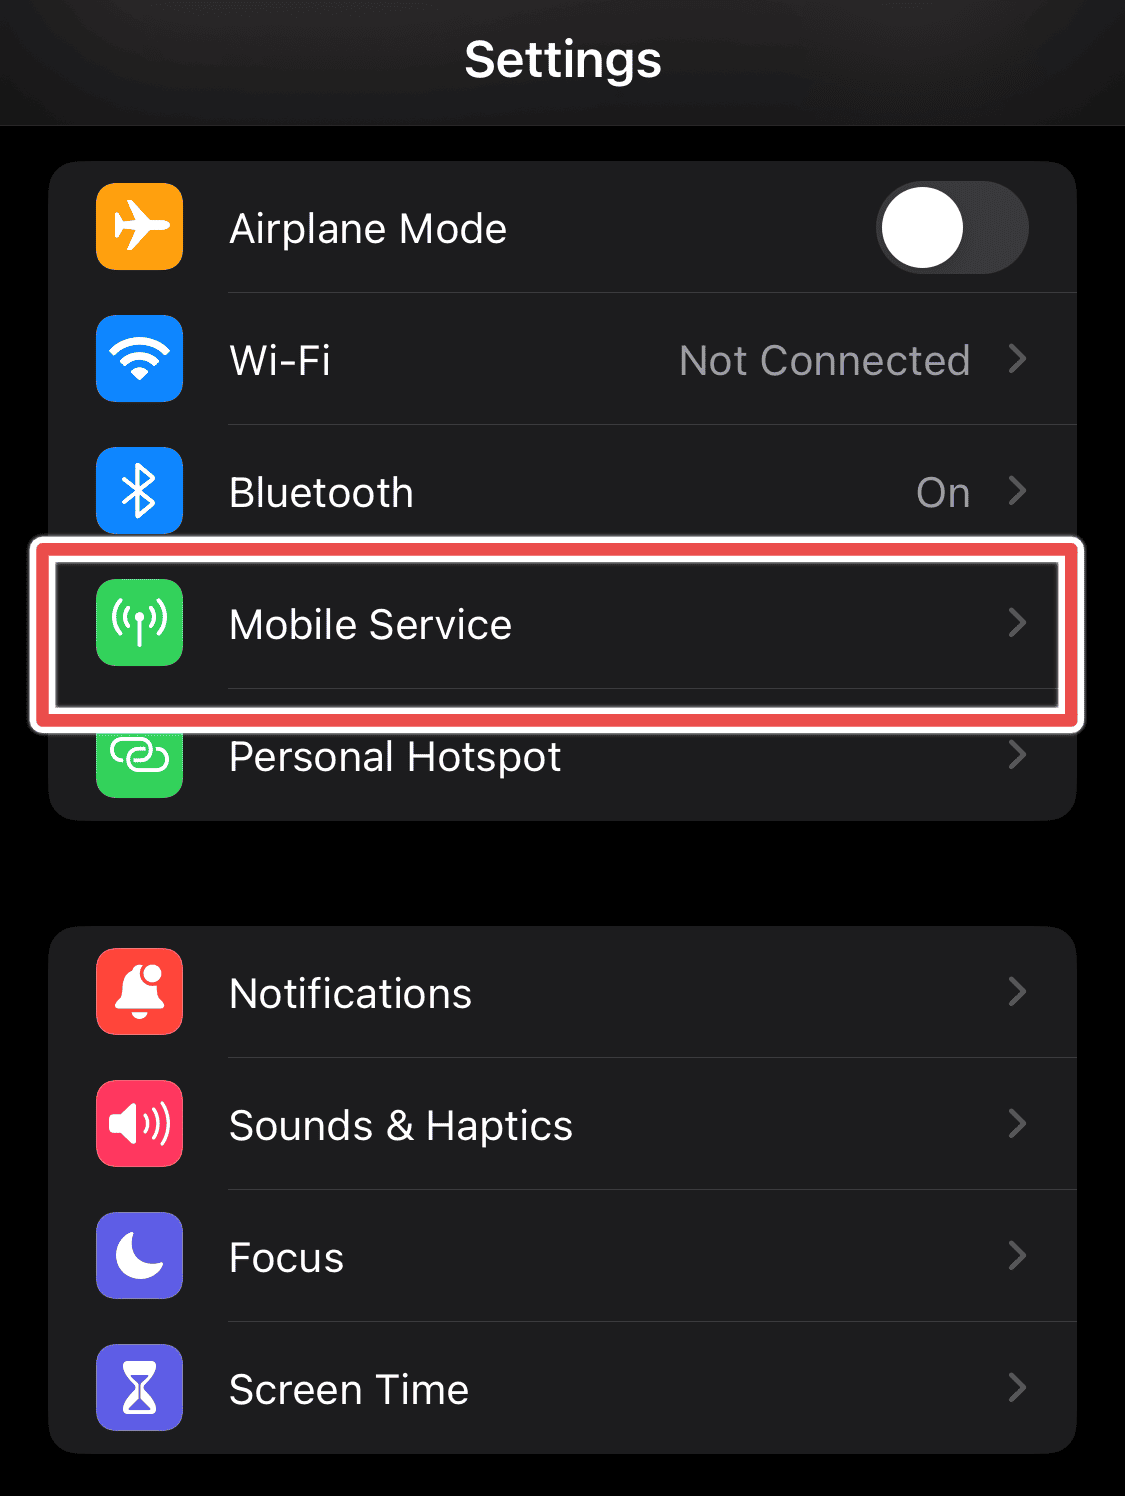 mobile service option on iPhone